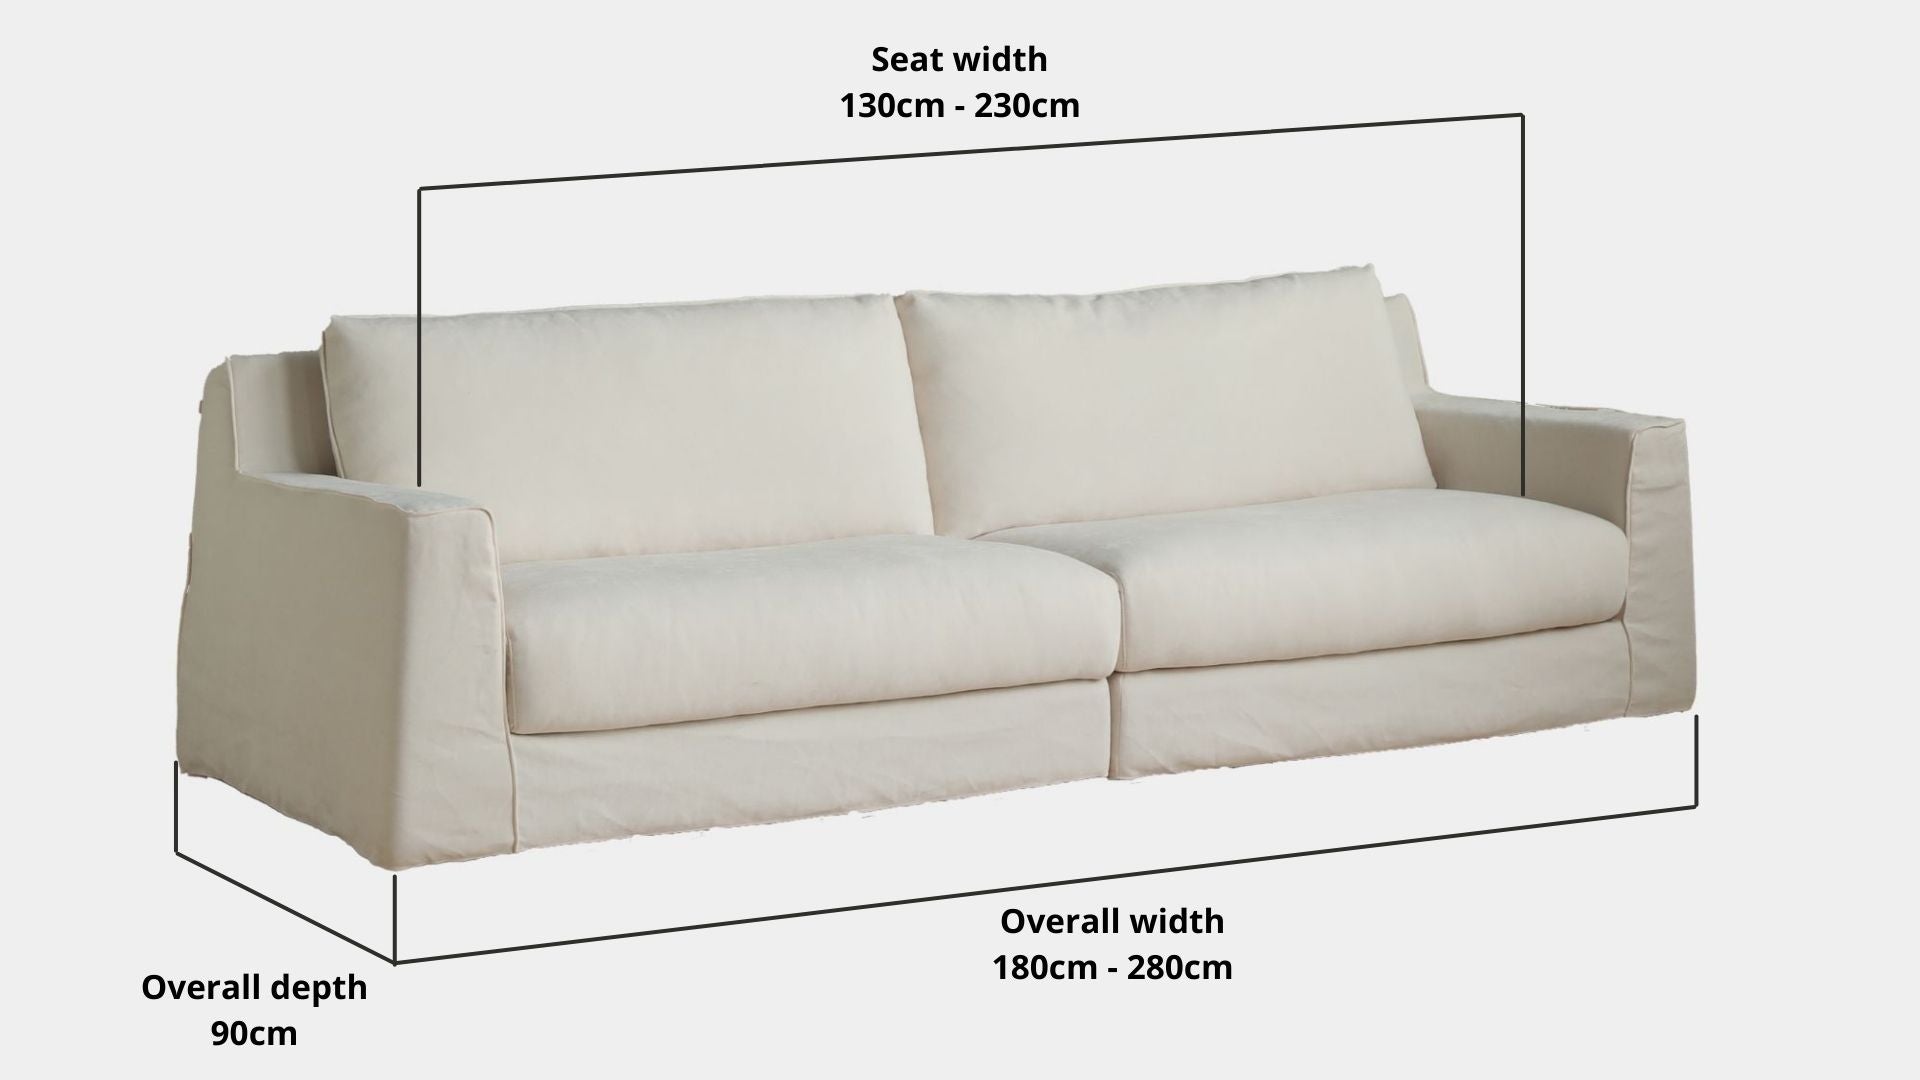 Details the key dimensions in terms of overall width, overall depth and seat width for Comfort Fabric Sofa